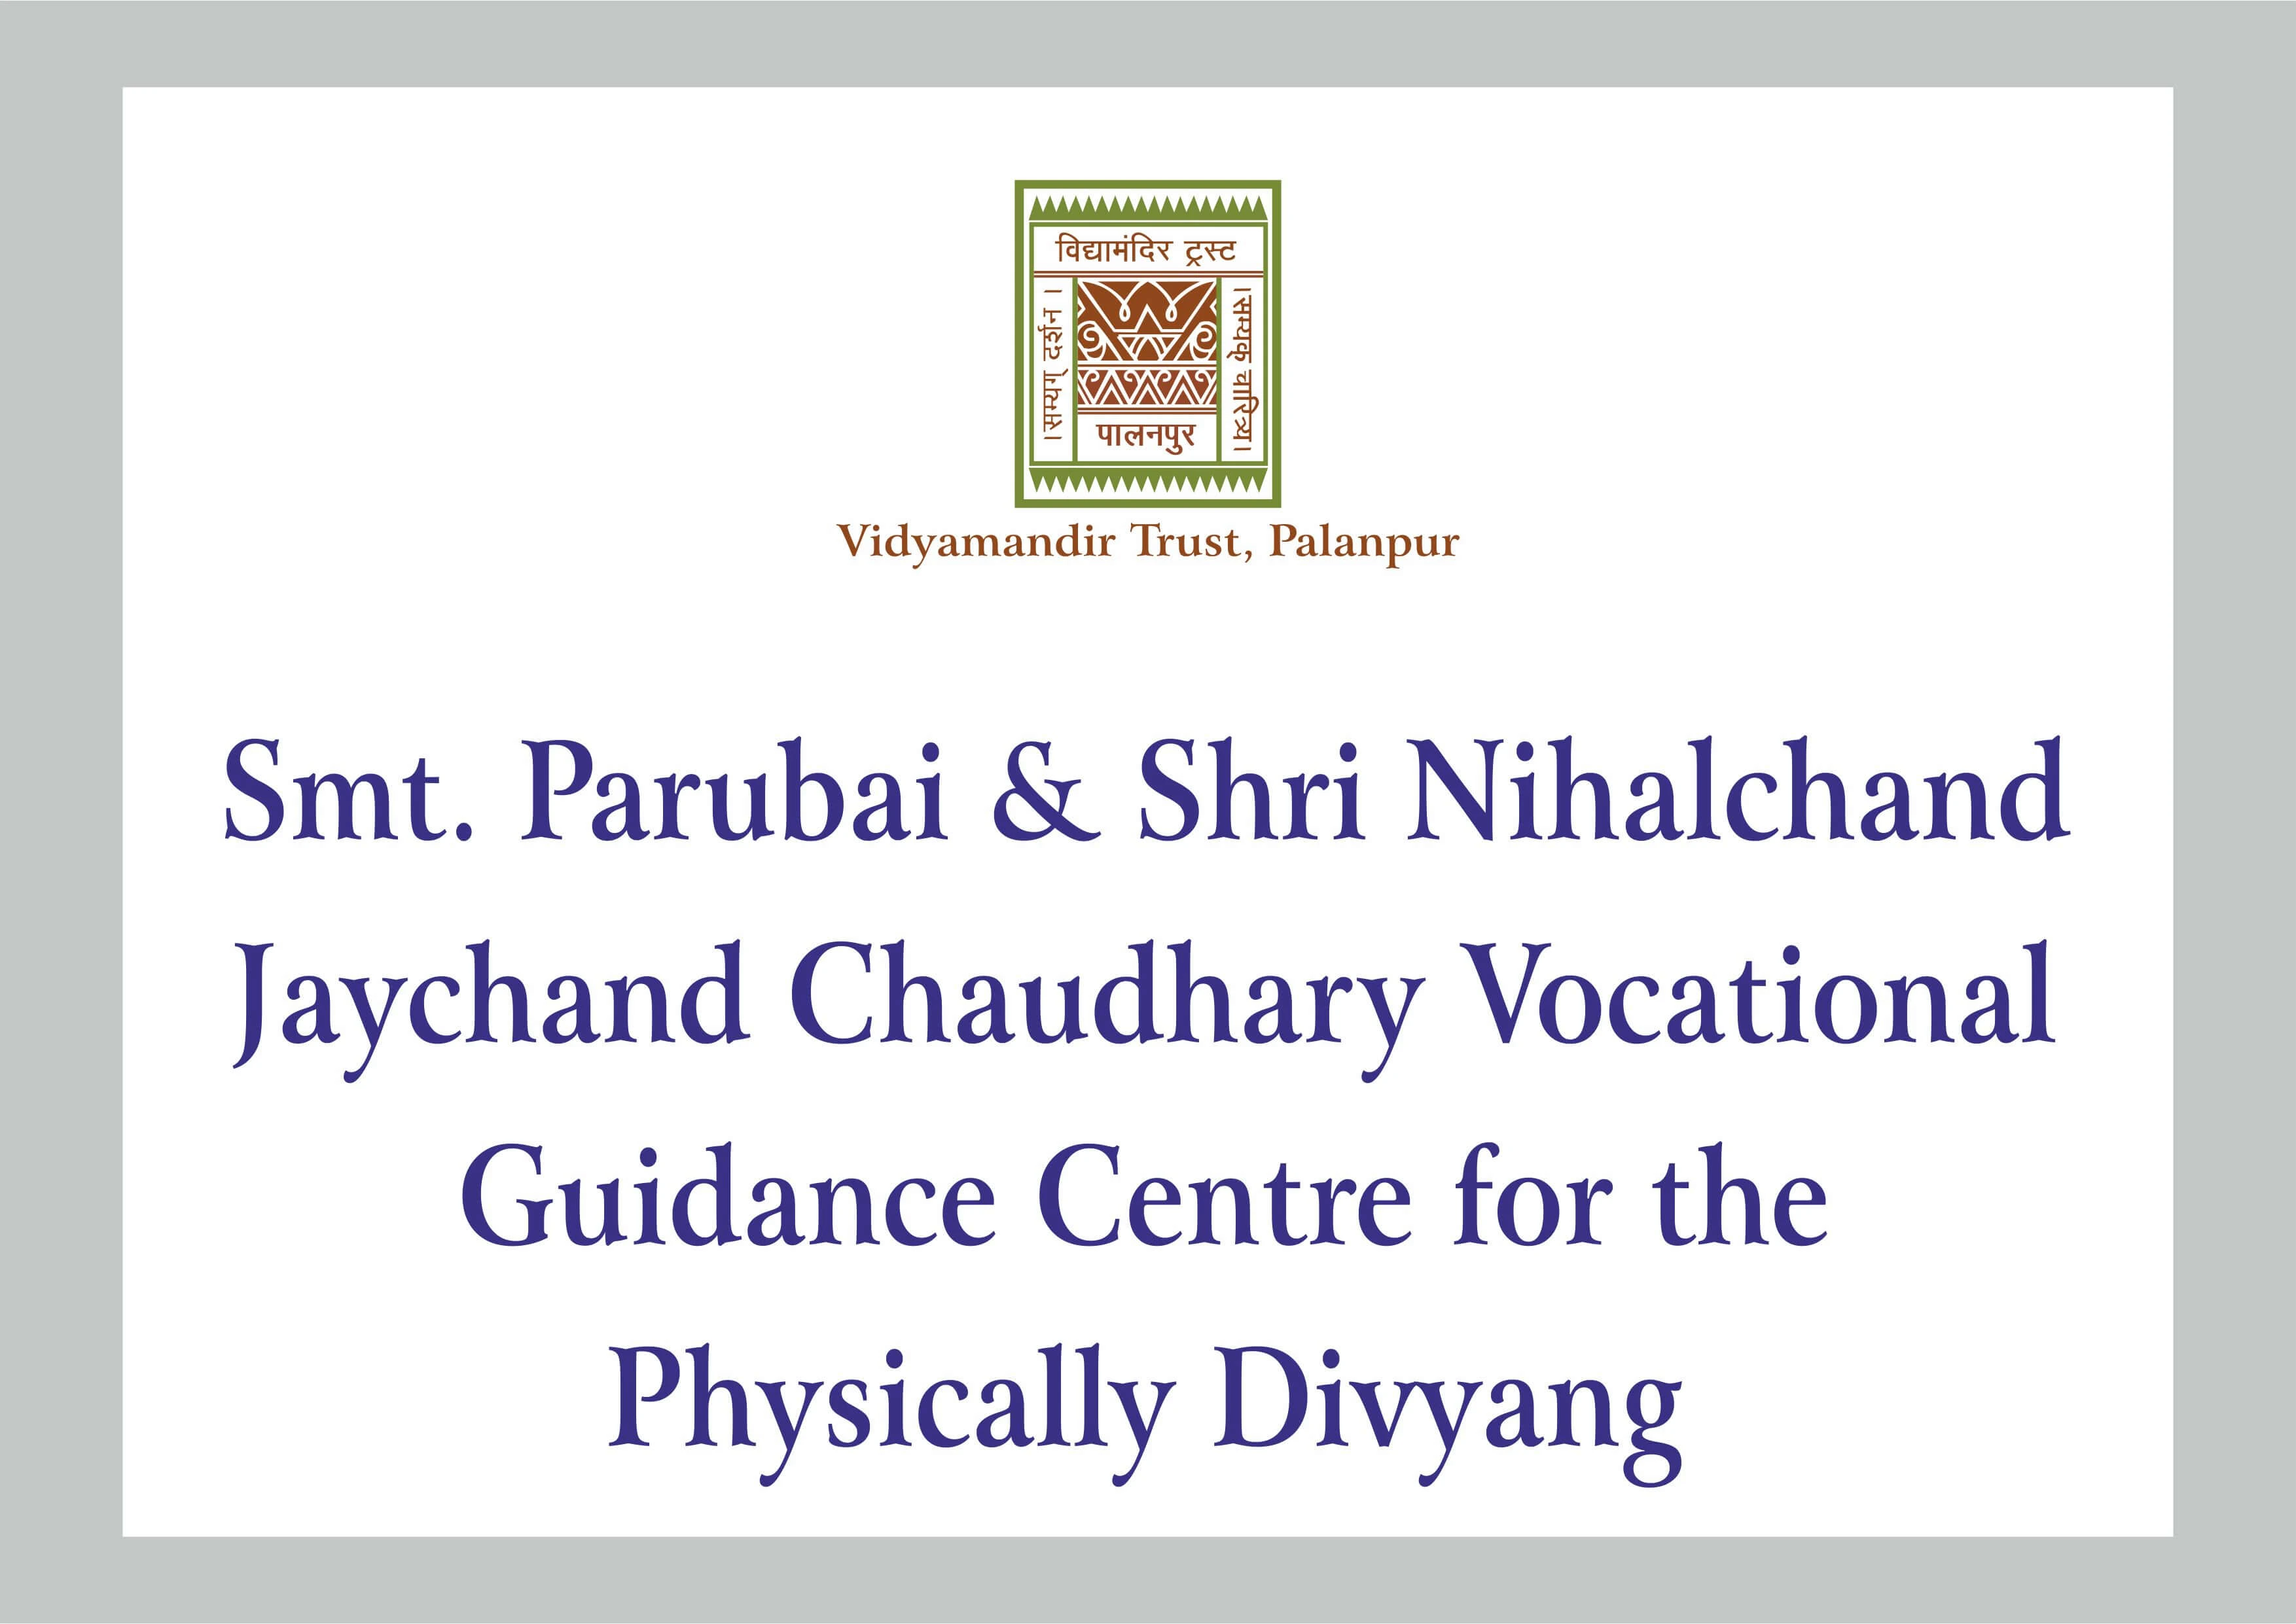 Smt. Parubai & Shri Nihalchand Jaychand Chaudhary Vocational Guidance Centre for the Physically Divyang - Building Photo